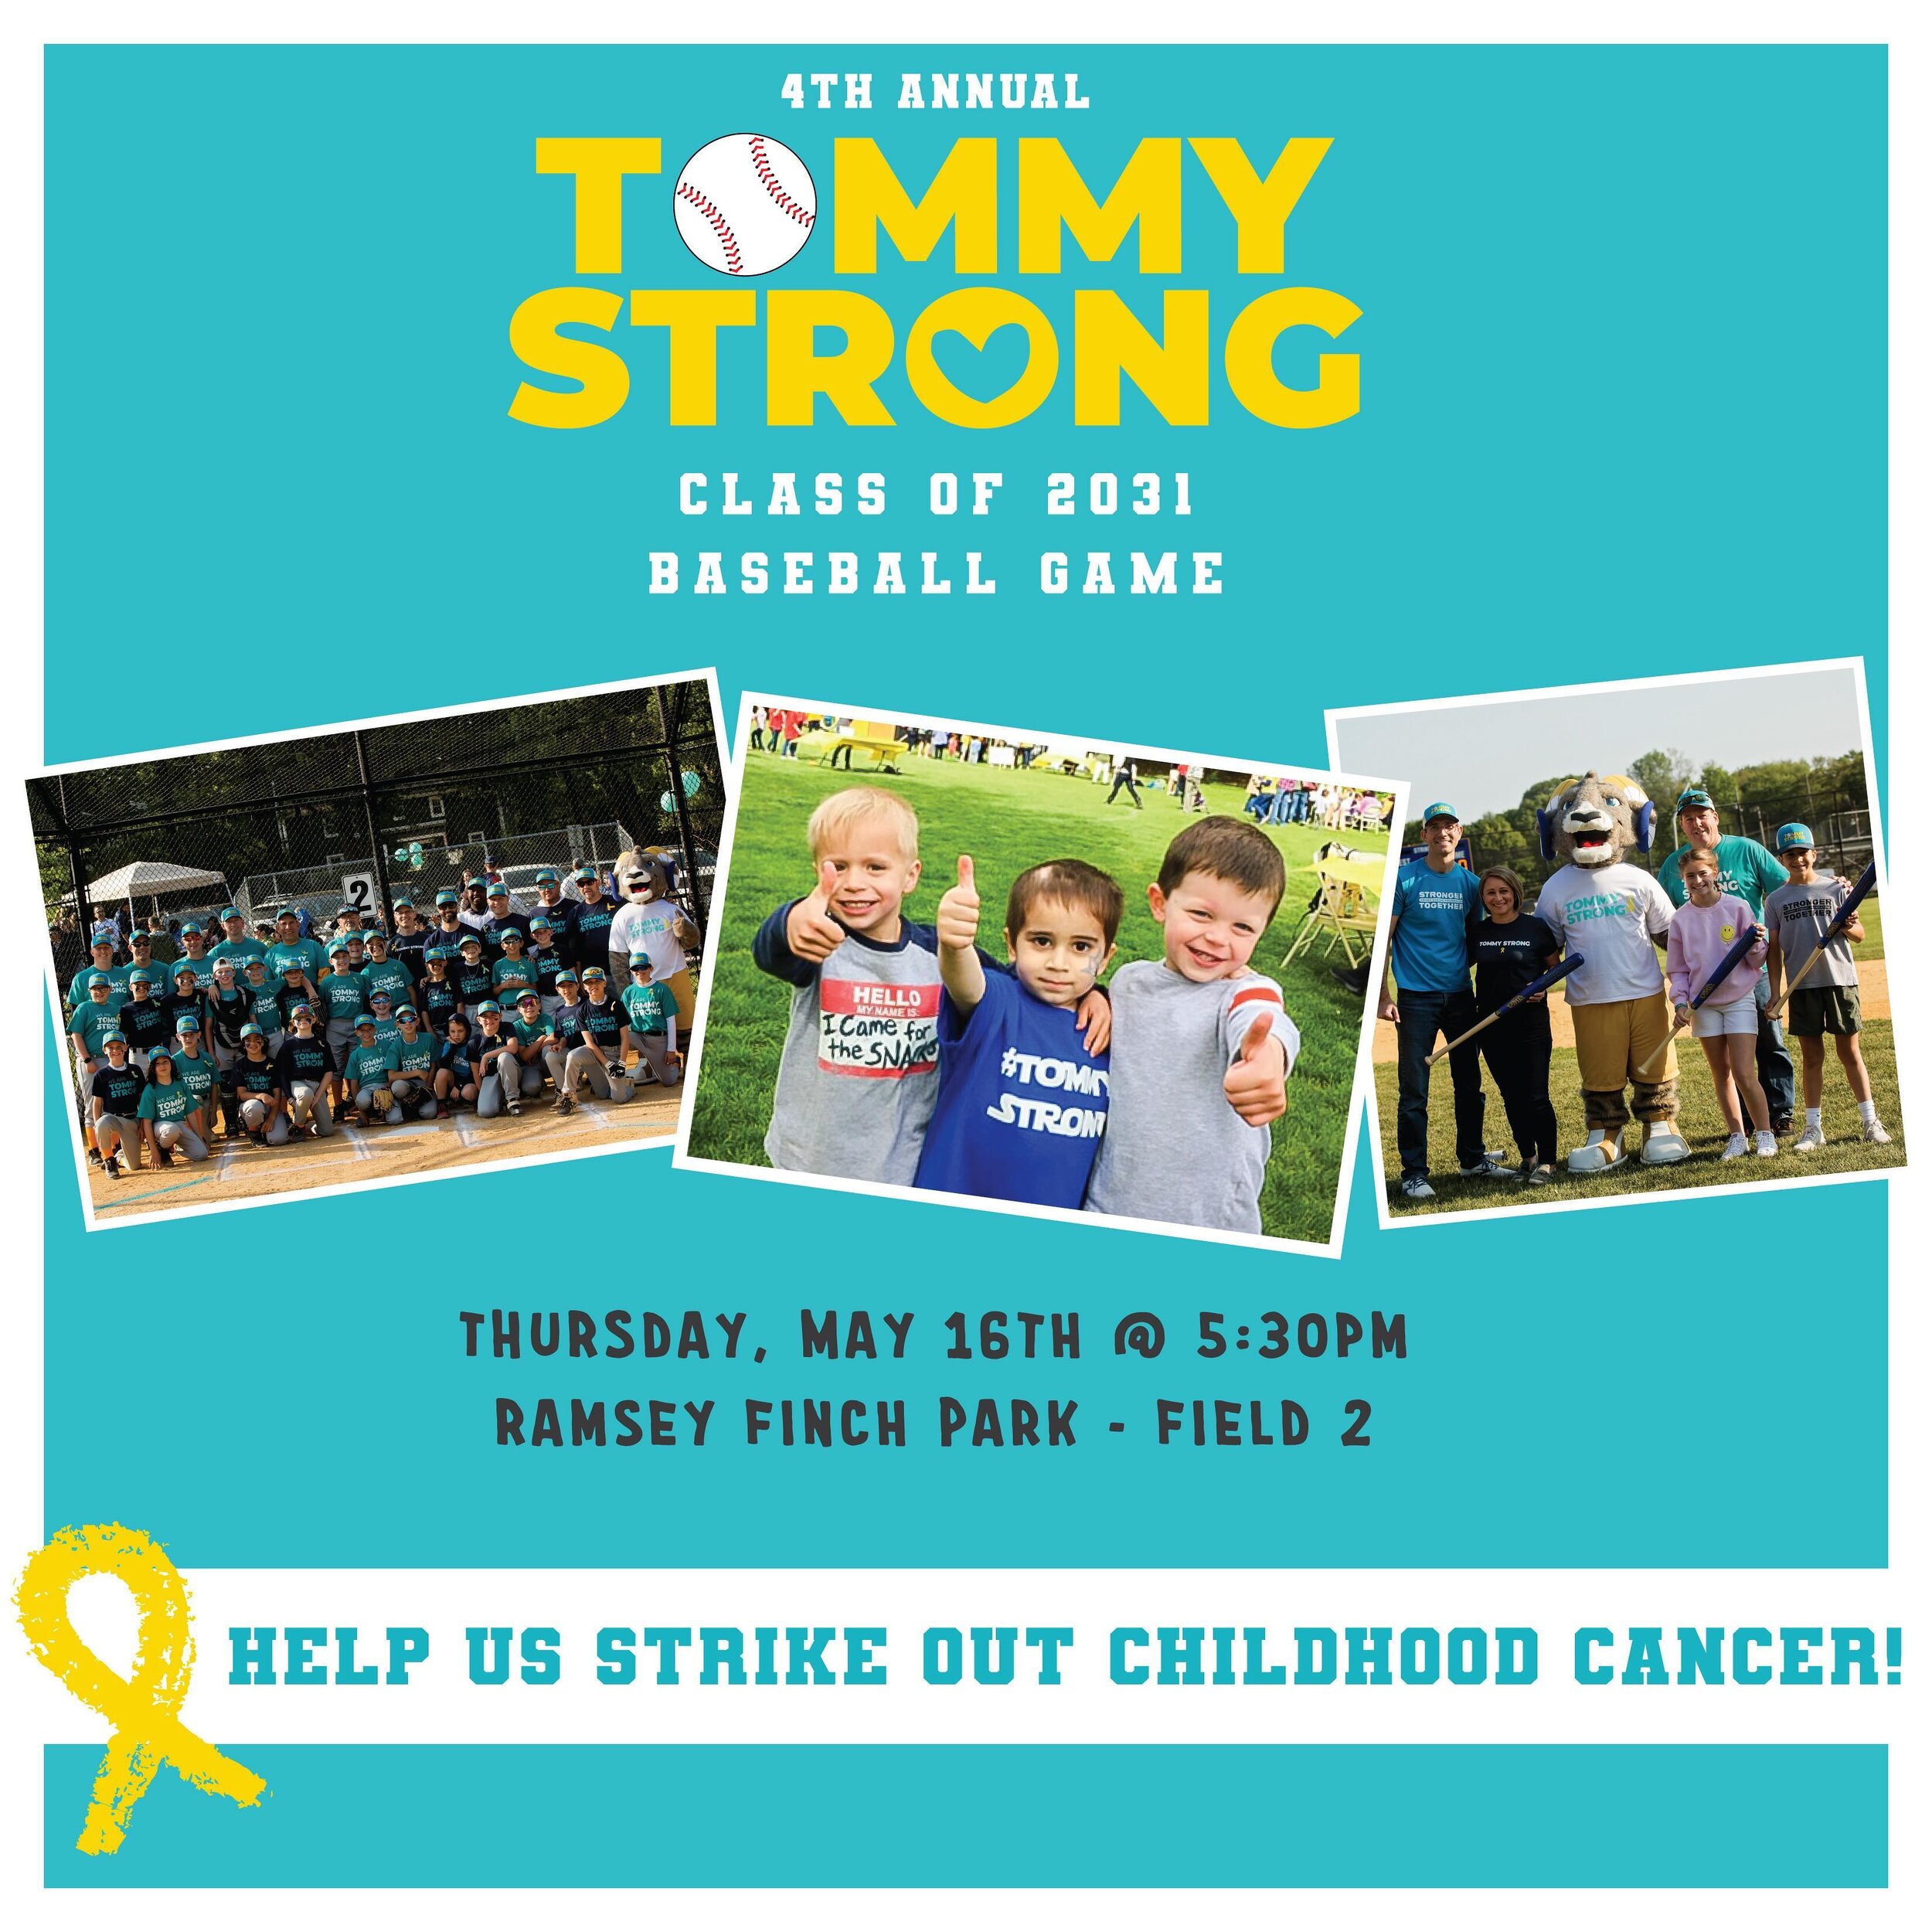 🎗️🩵⚾️ Our favorite sporting event of the year is happening soon! ⚾️🩵🎗️

Please join us on May 16th to cheer on the 11U Ramsey Travel Blue vs the 11U Ramsey Travel Gold Baseball teams as they meet again on the baseball diamond for their 4th annual